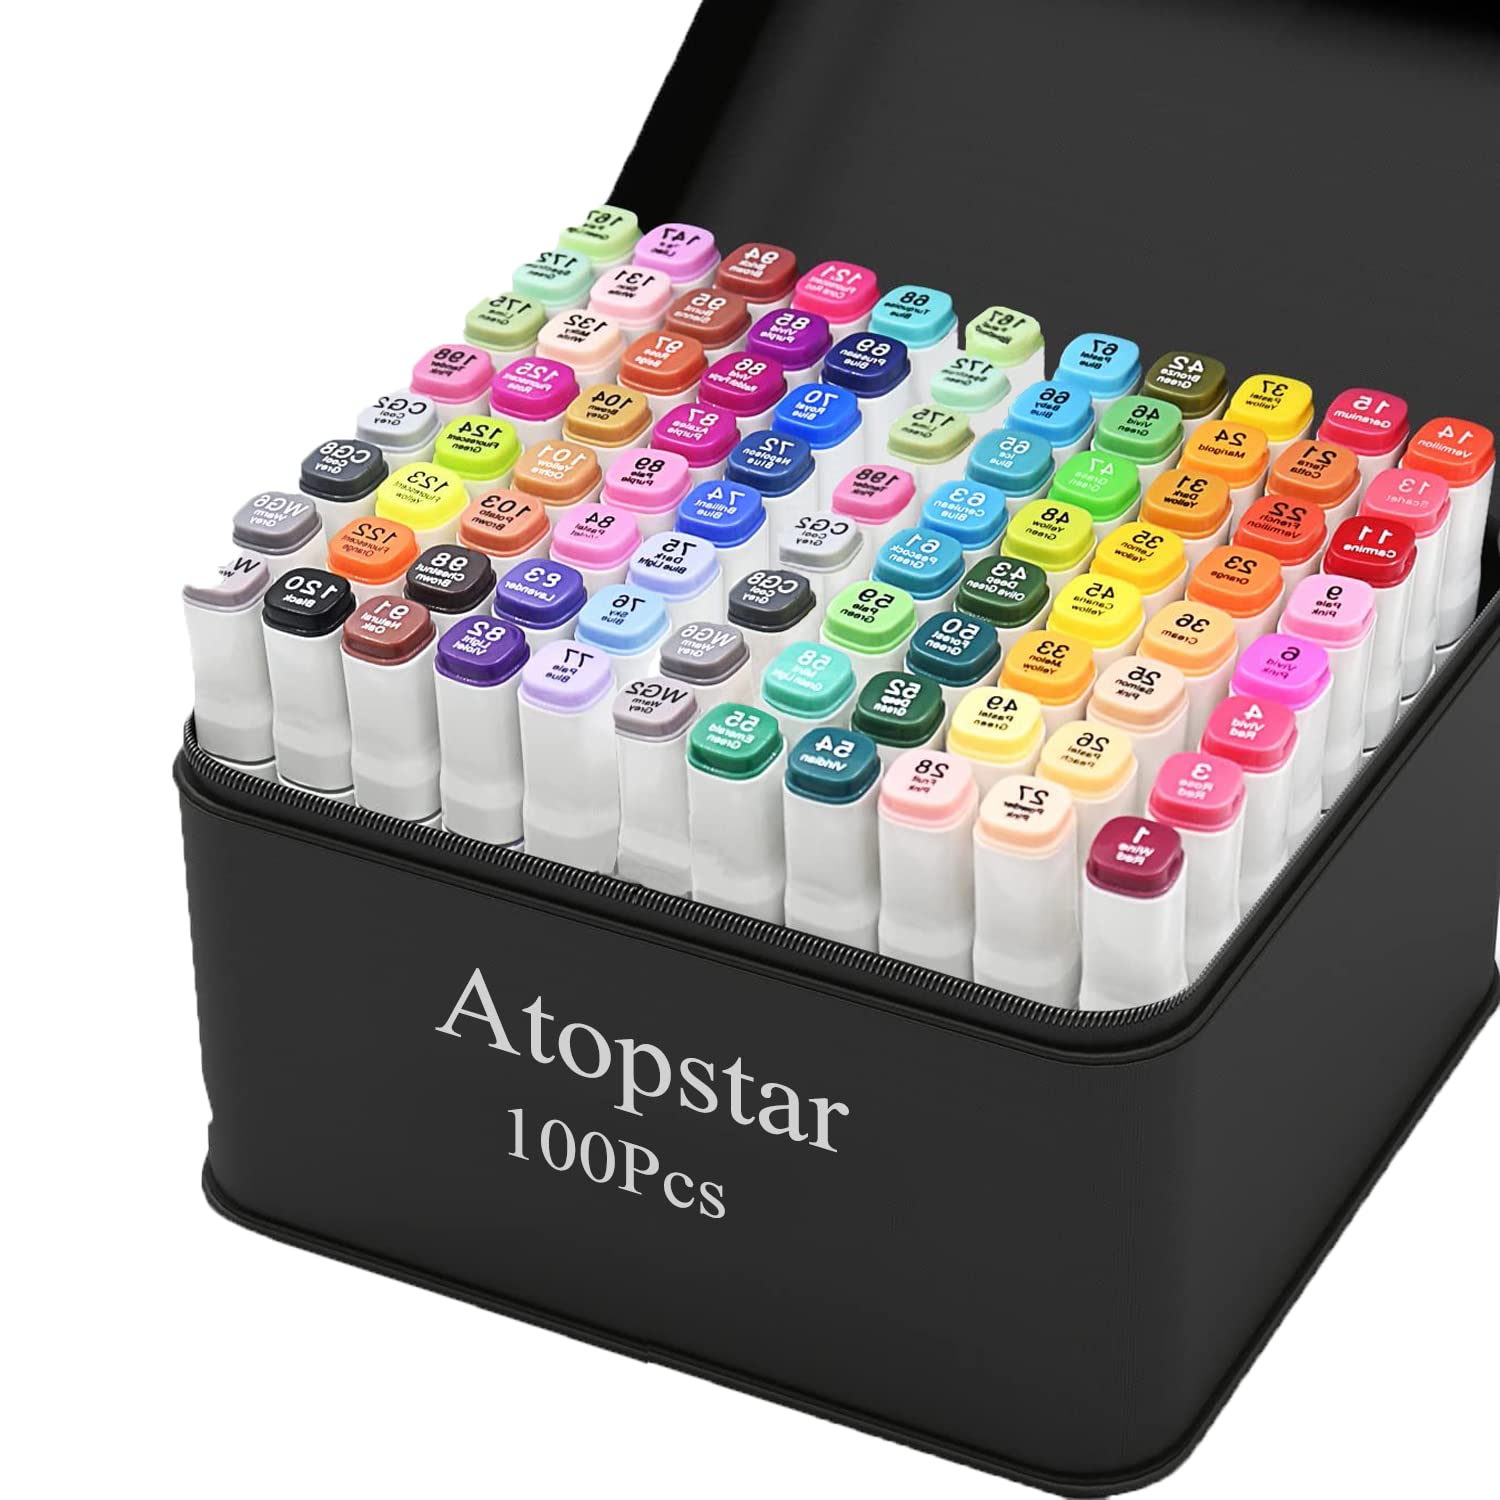 ATOPSTAR 80 Colors Alcohol Markers Artist Drawing Art for Kids Dual Tip  Adult Coloring Painting Supplies Perfect Boys Girls Students Adult(80 Black  Shell)